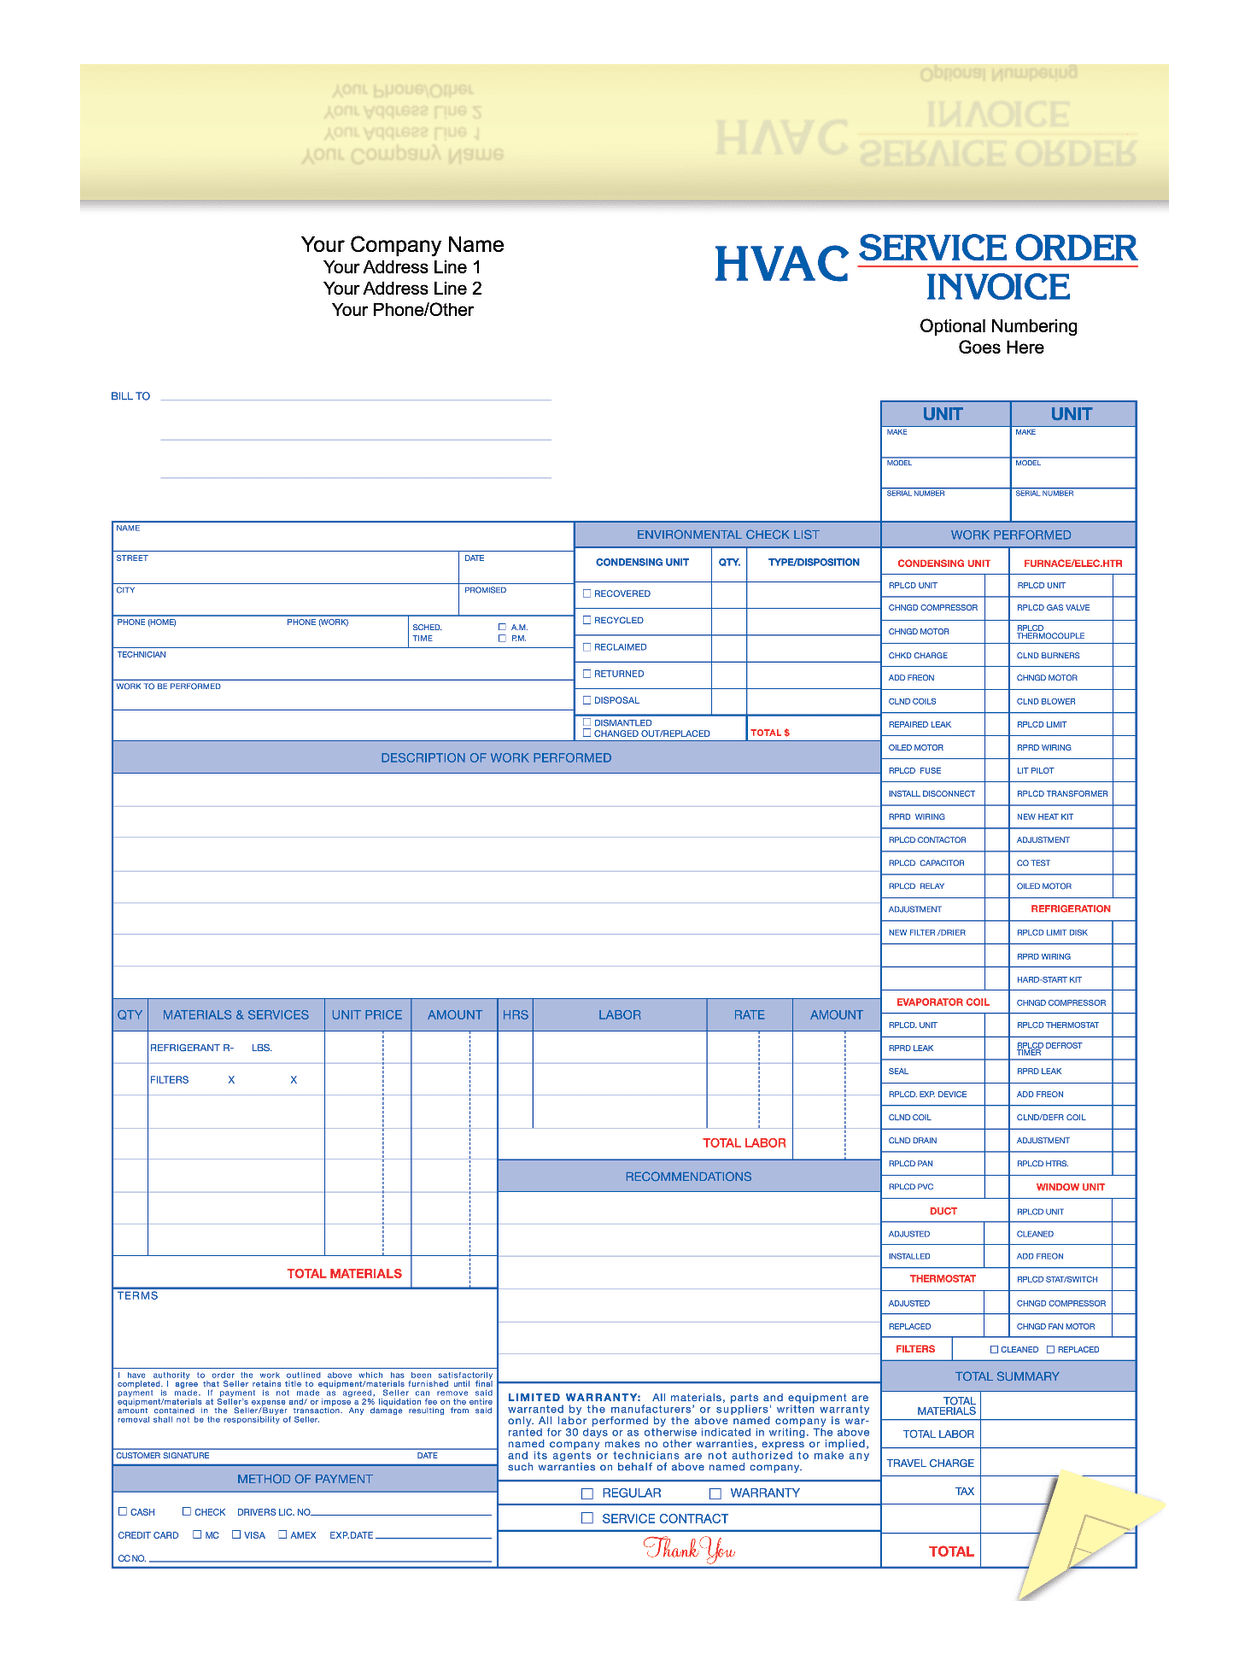 Forms & Record Keeping 22 Custom HVAC Service Heating & Air Intended For Hvac Service Invoice Template Free